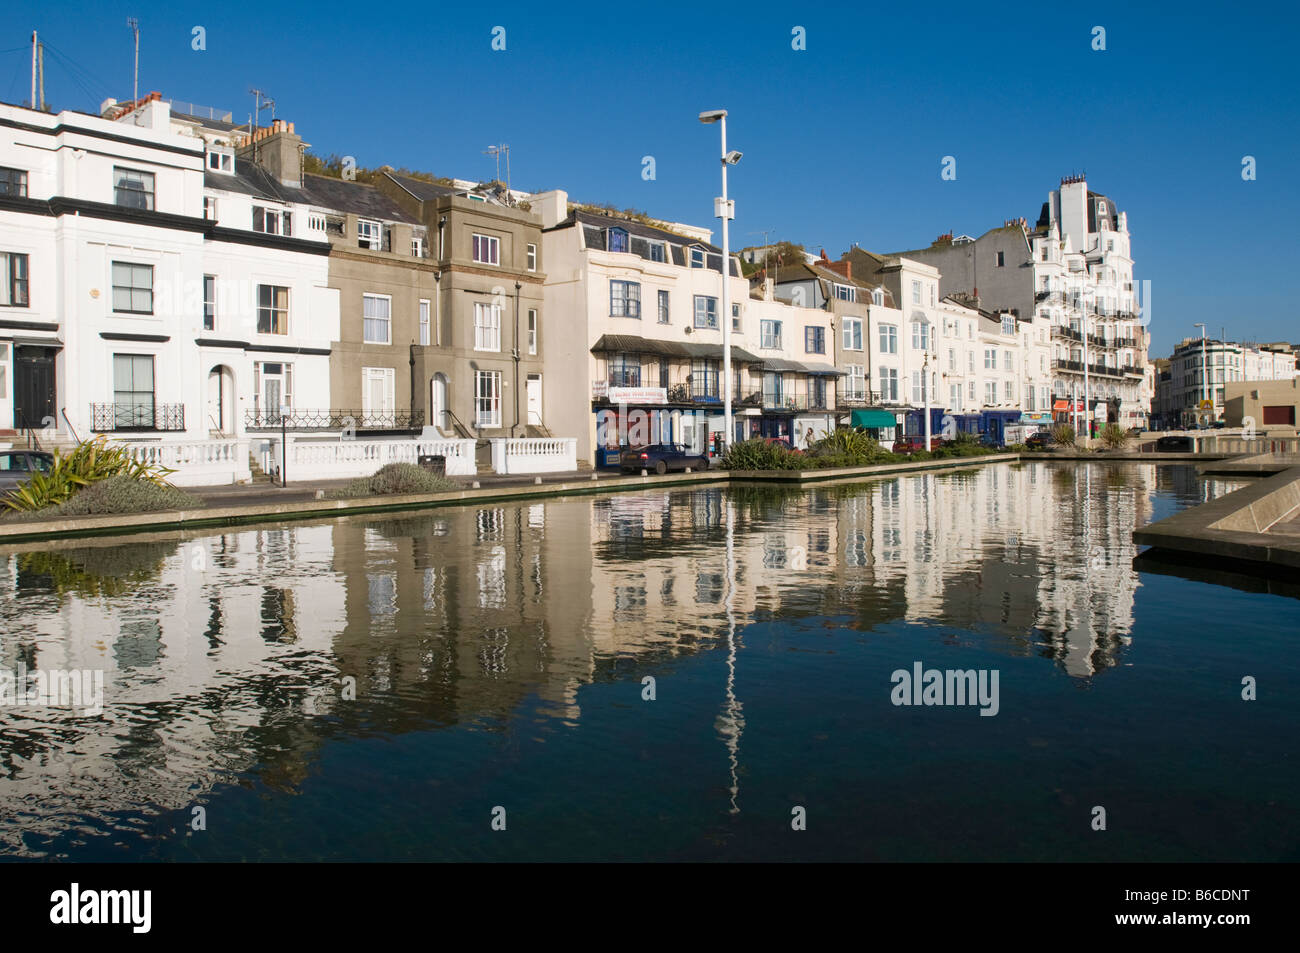 UNITED KINGDOM, ENGLAND, 9th December 2008. Buildings along the seafront at Hastings reflected in a water feature. Stock Photo